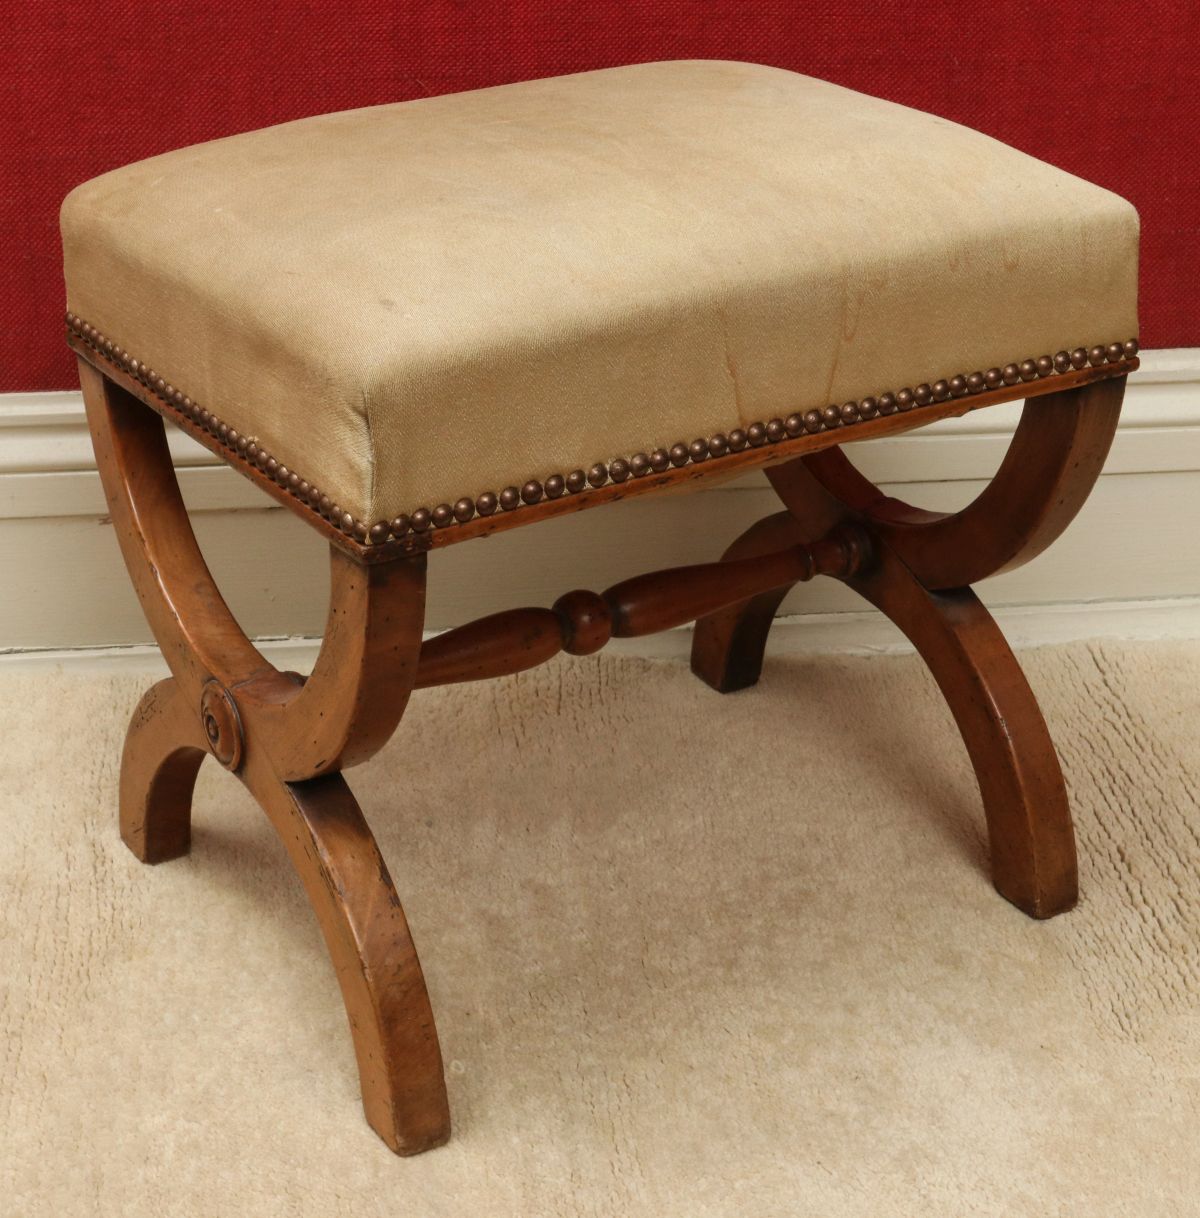 A 19TH C. FRENCH FRUITWOOD DIRECTOIRE CURULE STOOL